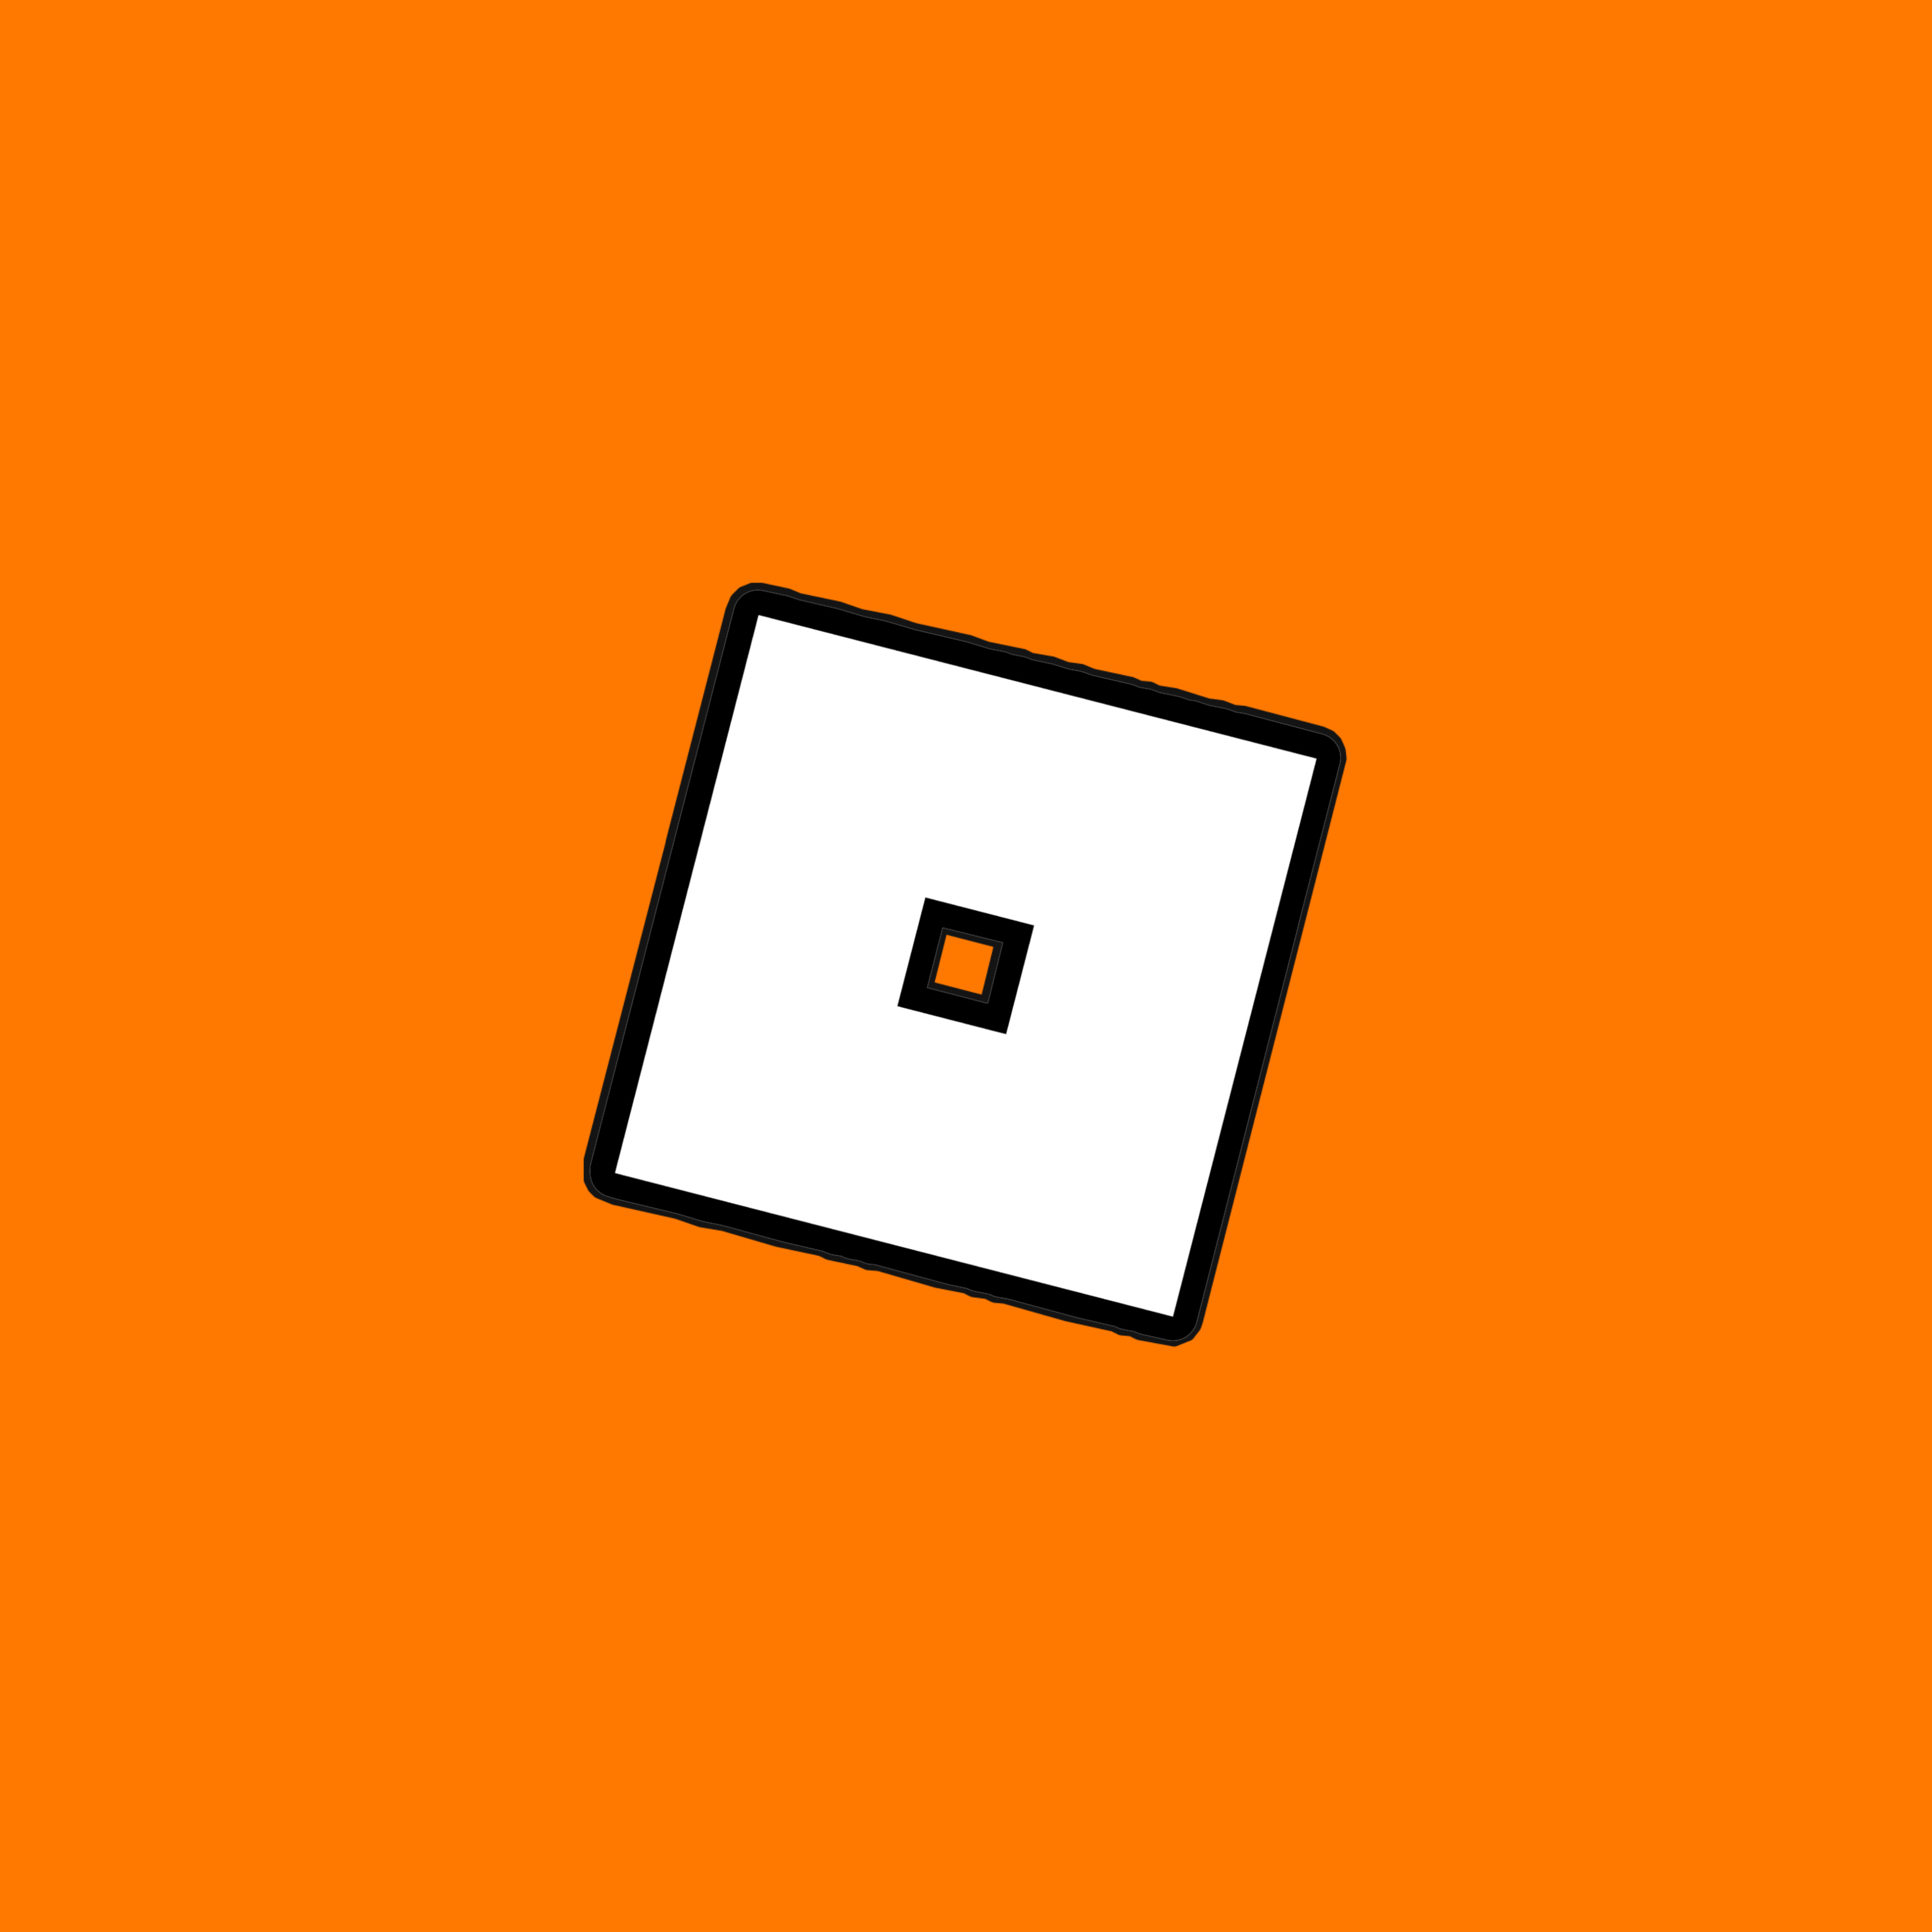 Icons Roblox Orange Roblox App Icon Image By Ii Ashe - resize icon roblox